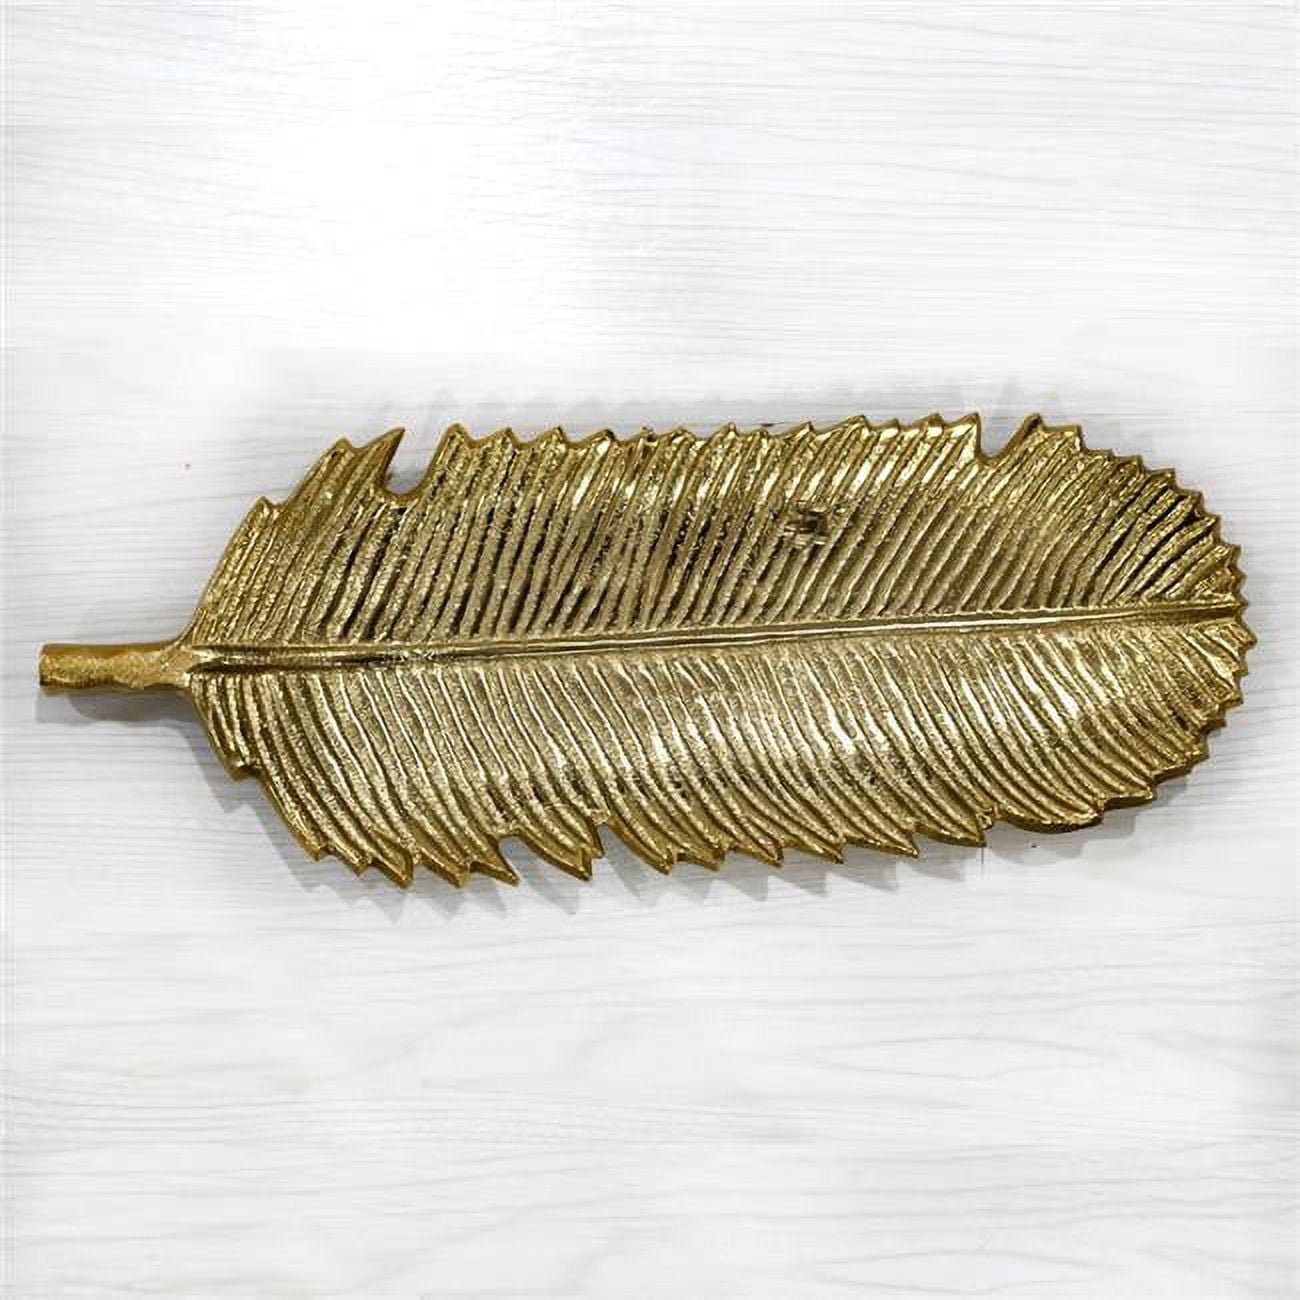 Picture of BBH Homes UBBBVK035AB2020ASC2HS 17.99 x 6.29 x 1.18 in. Handmade Gold Coated Decorative Aluminum Tray